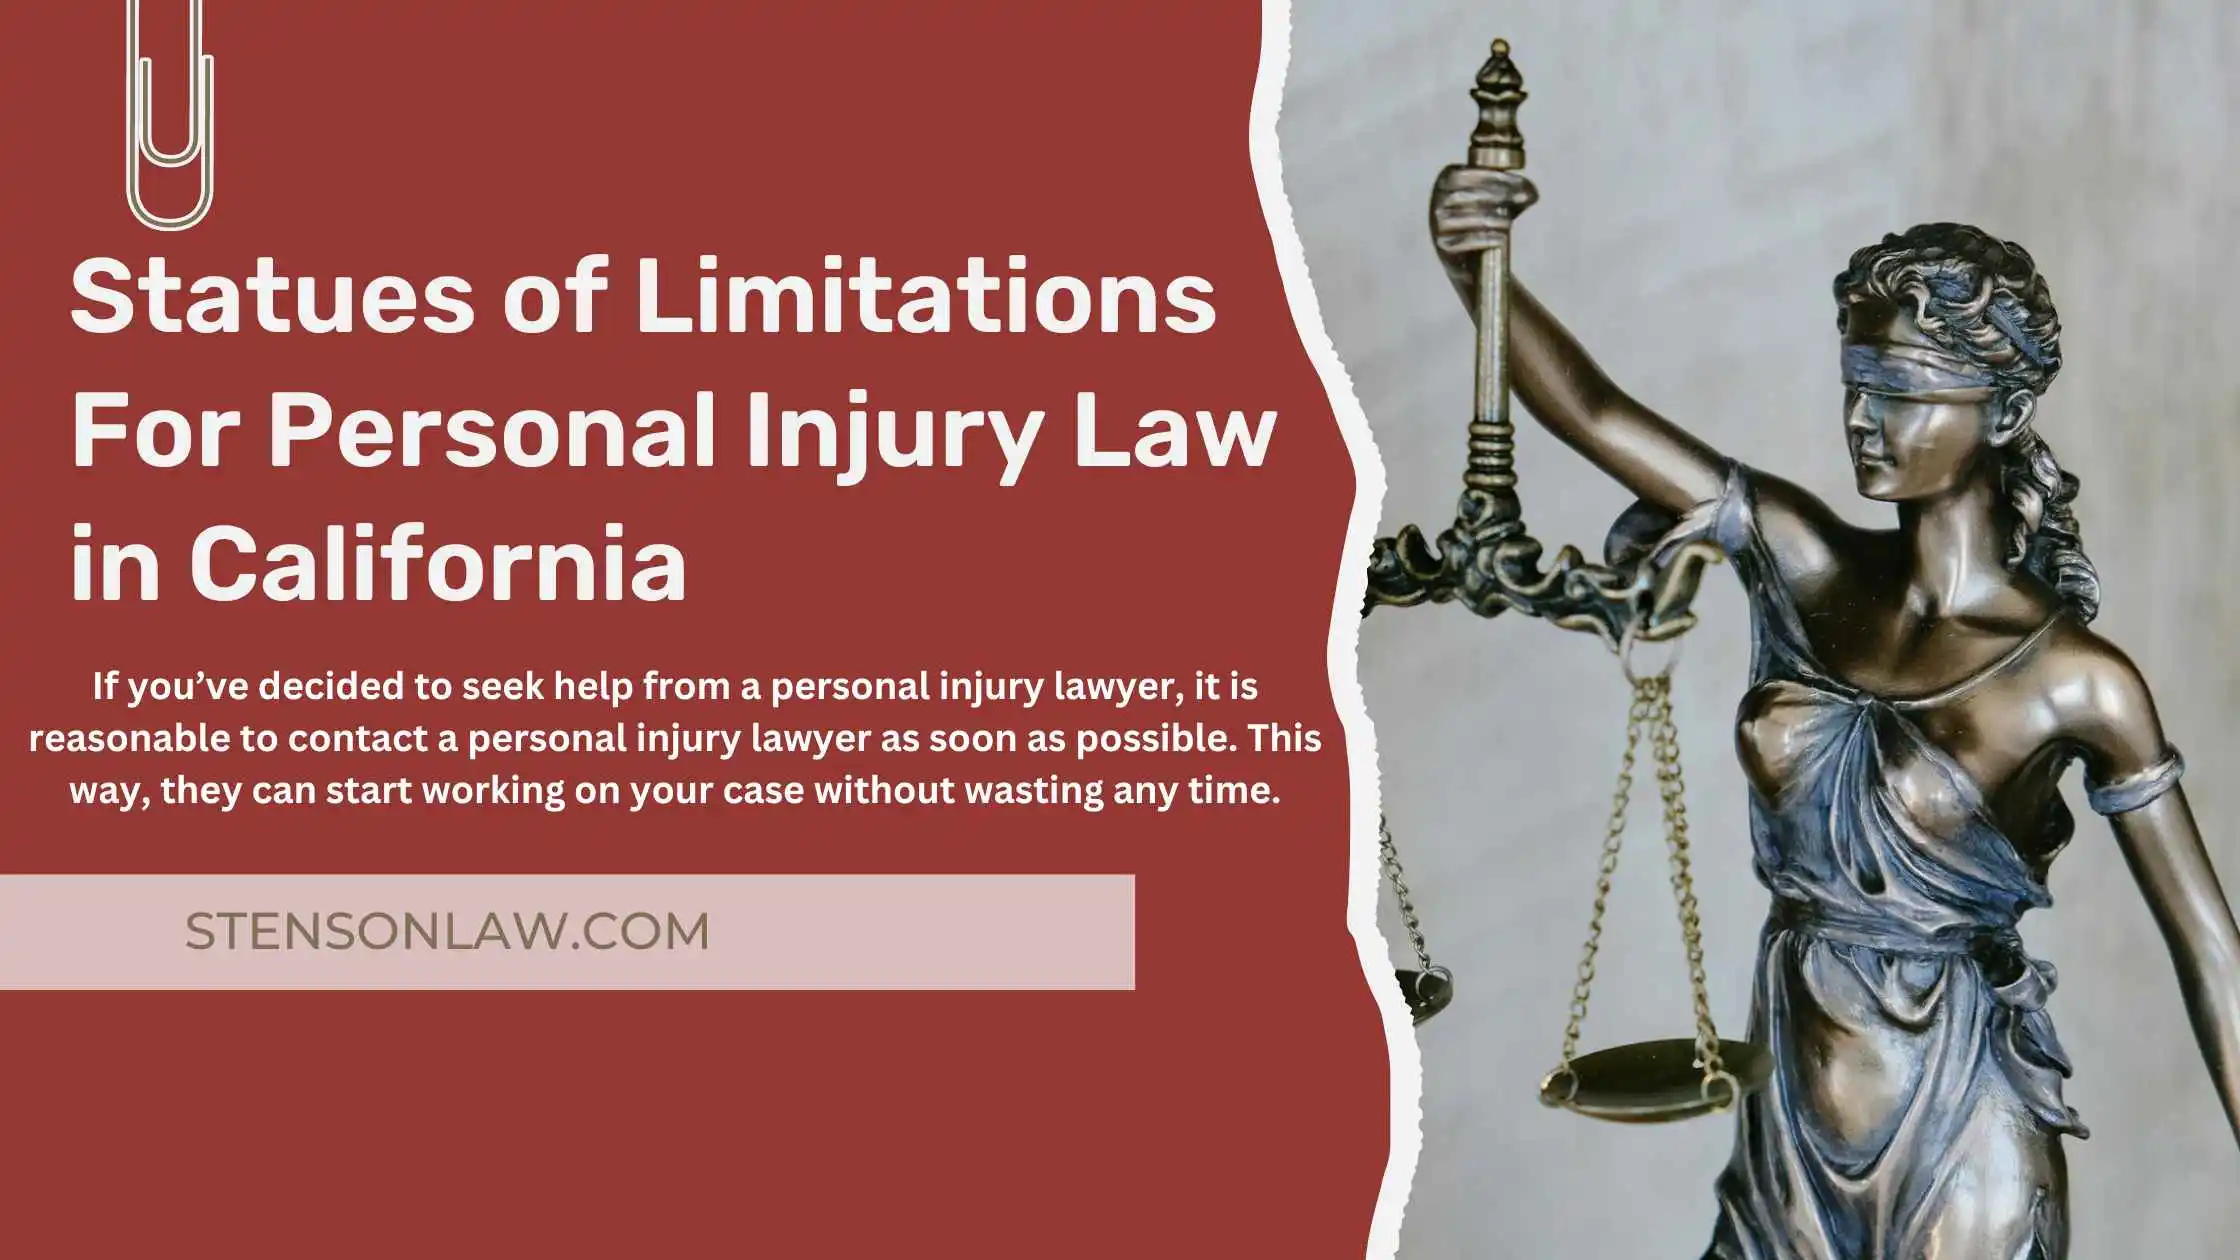 Statues of Limitations For Personal Injury Law in California